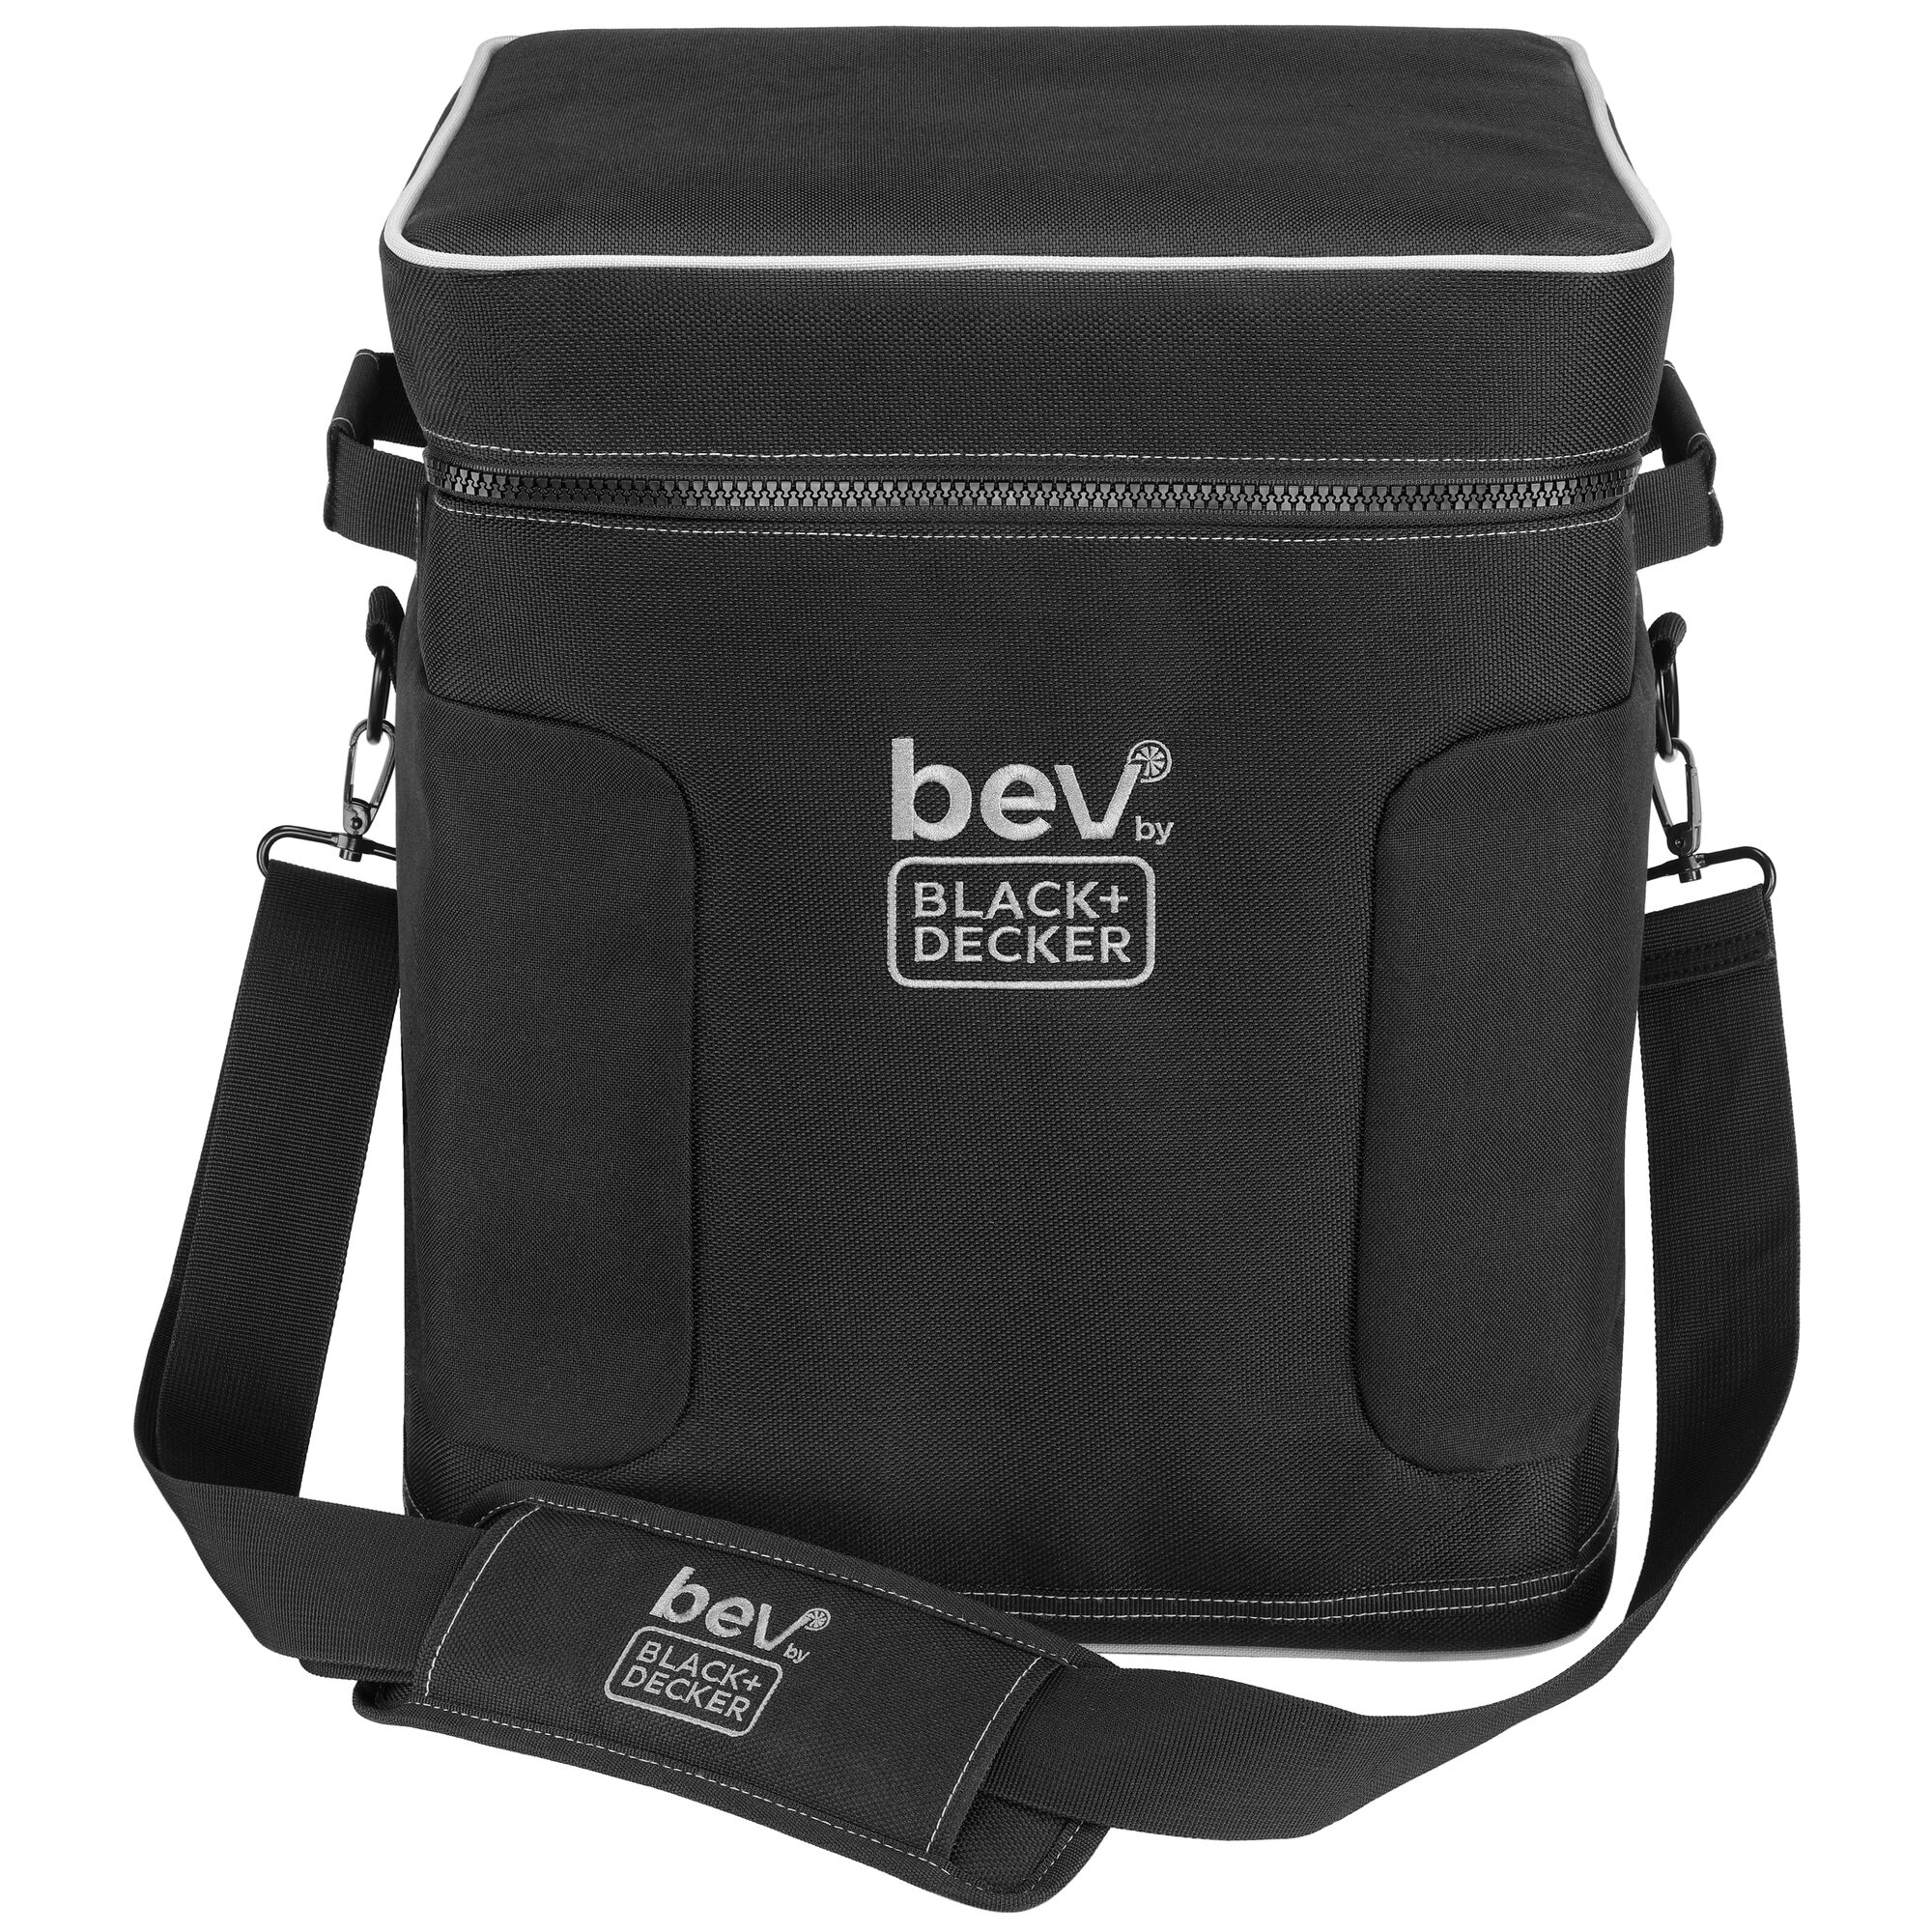 front facing view of the bev by BLACK+DECKER™ cocktail maker storage bag